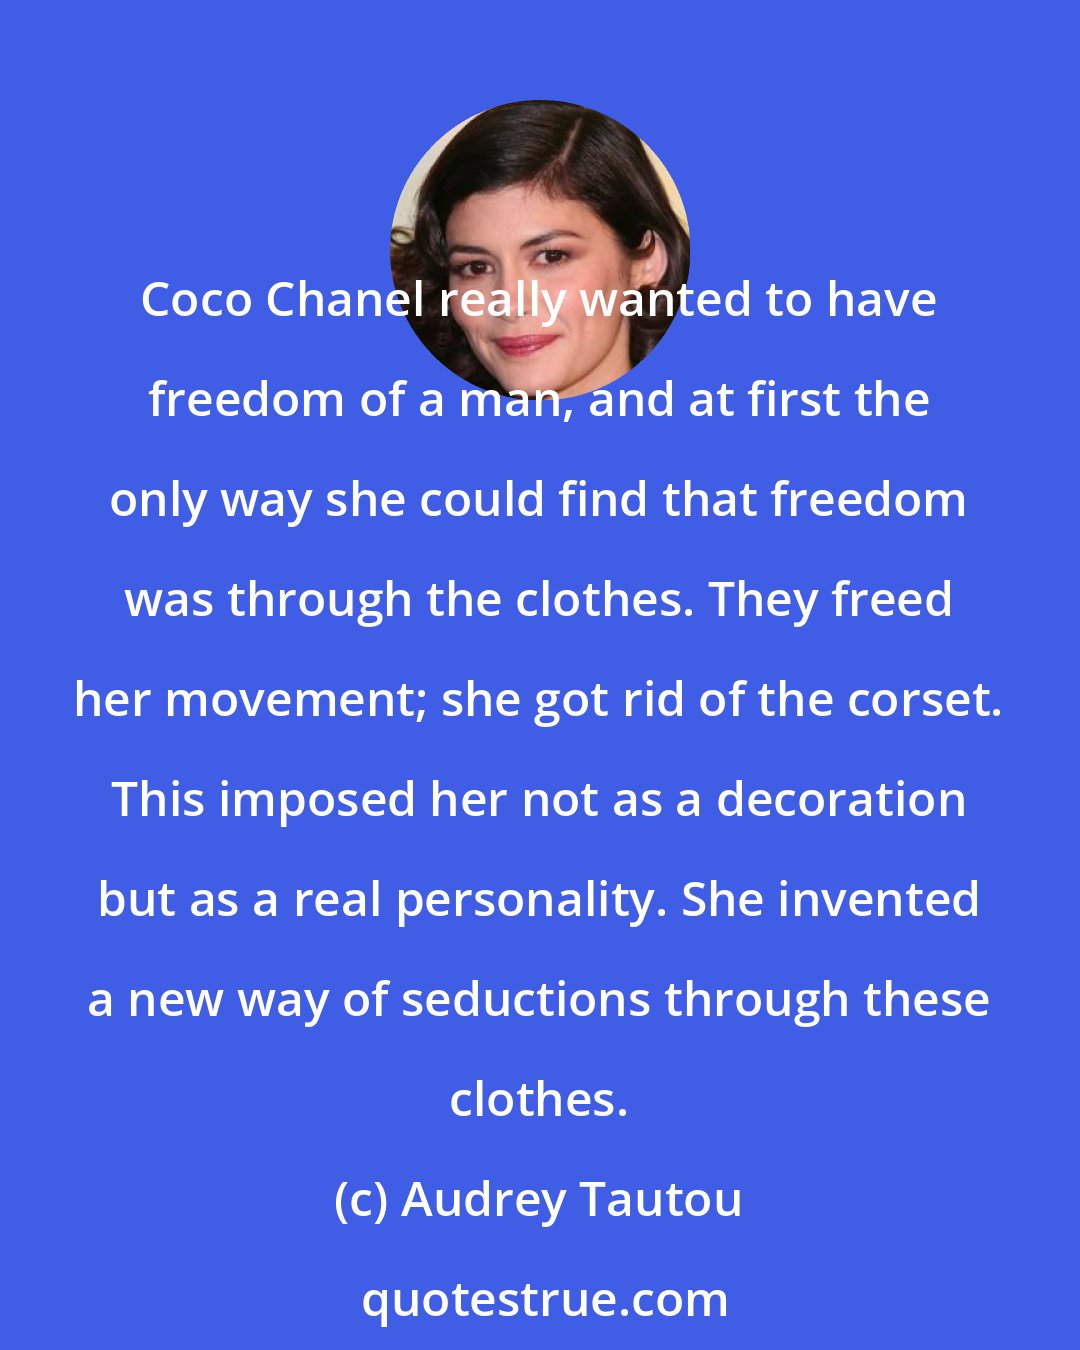 Audrey Tautou: Coco Chanel really wanted to have freedom of a man, and at first the only way she could find that freedom was through the clothes. They freed her movement; she got rid of the corset. This imposed her not as a decoration but as a real personality. She invented a new way of seductions through these clothes.